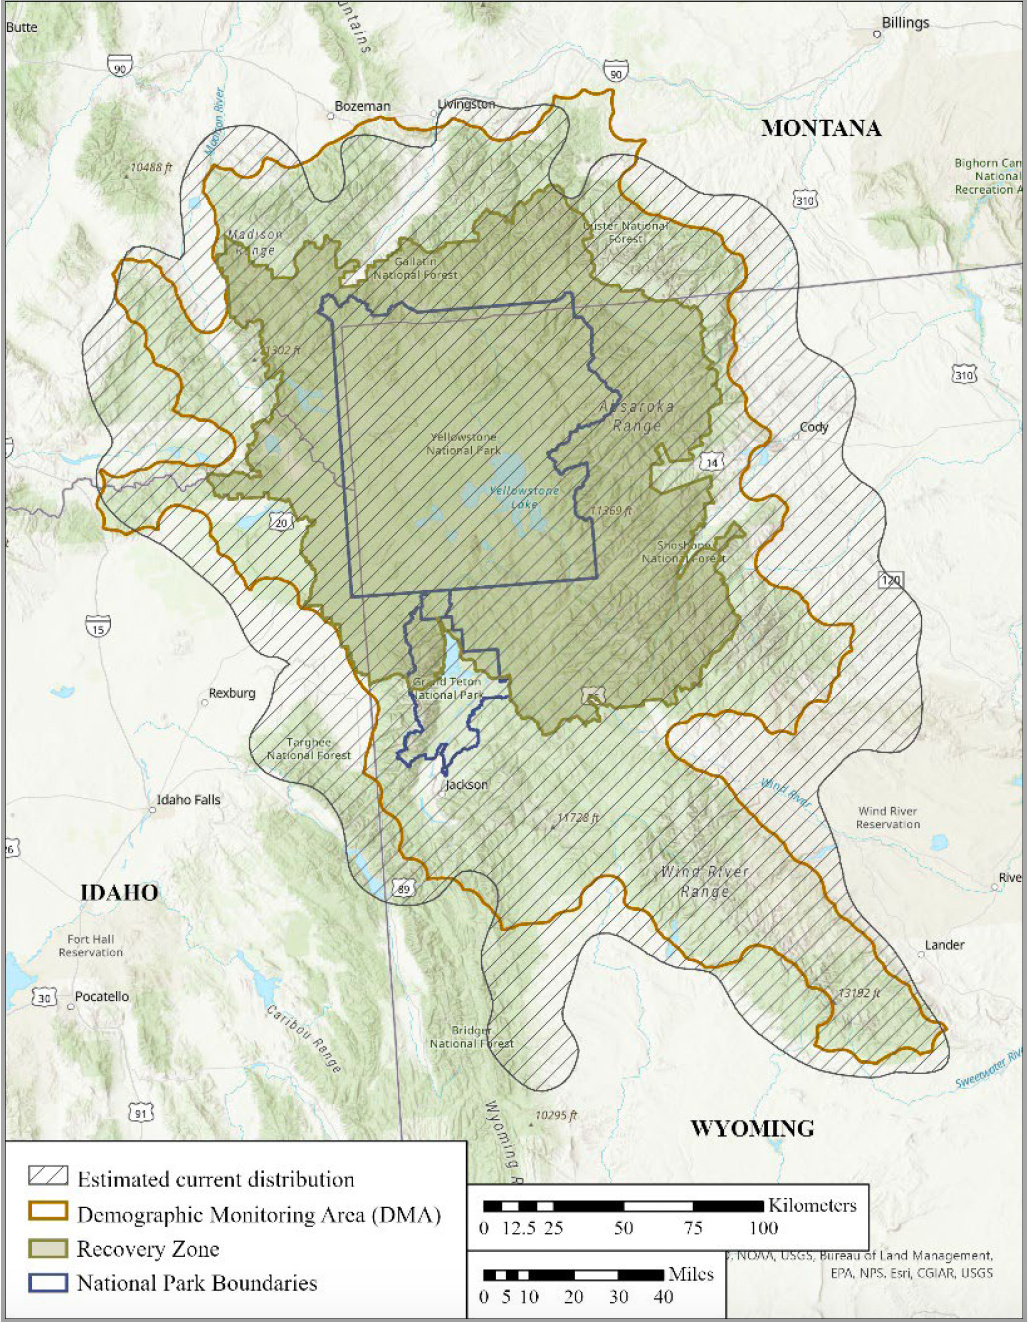 A map showing the grizzly bear demographic monitoring area.